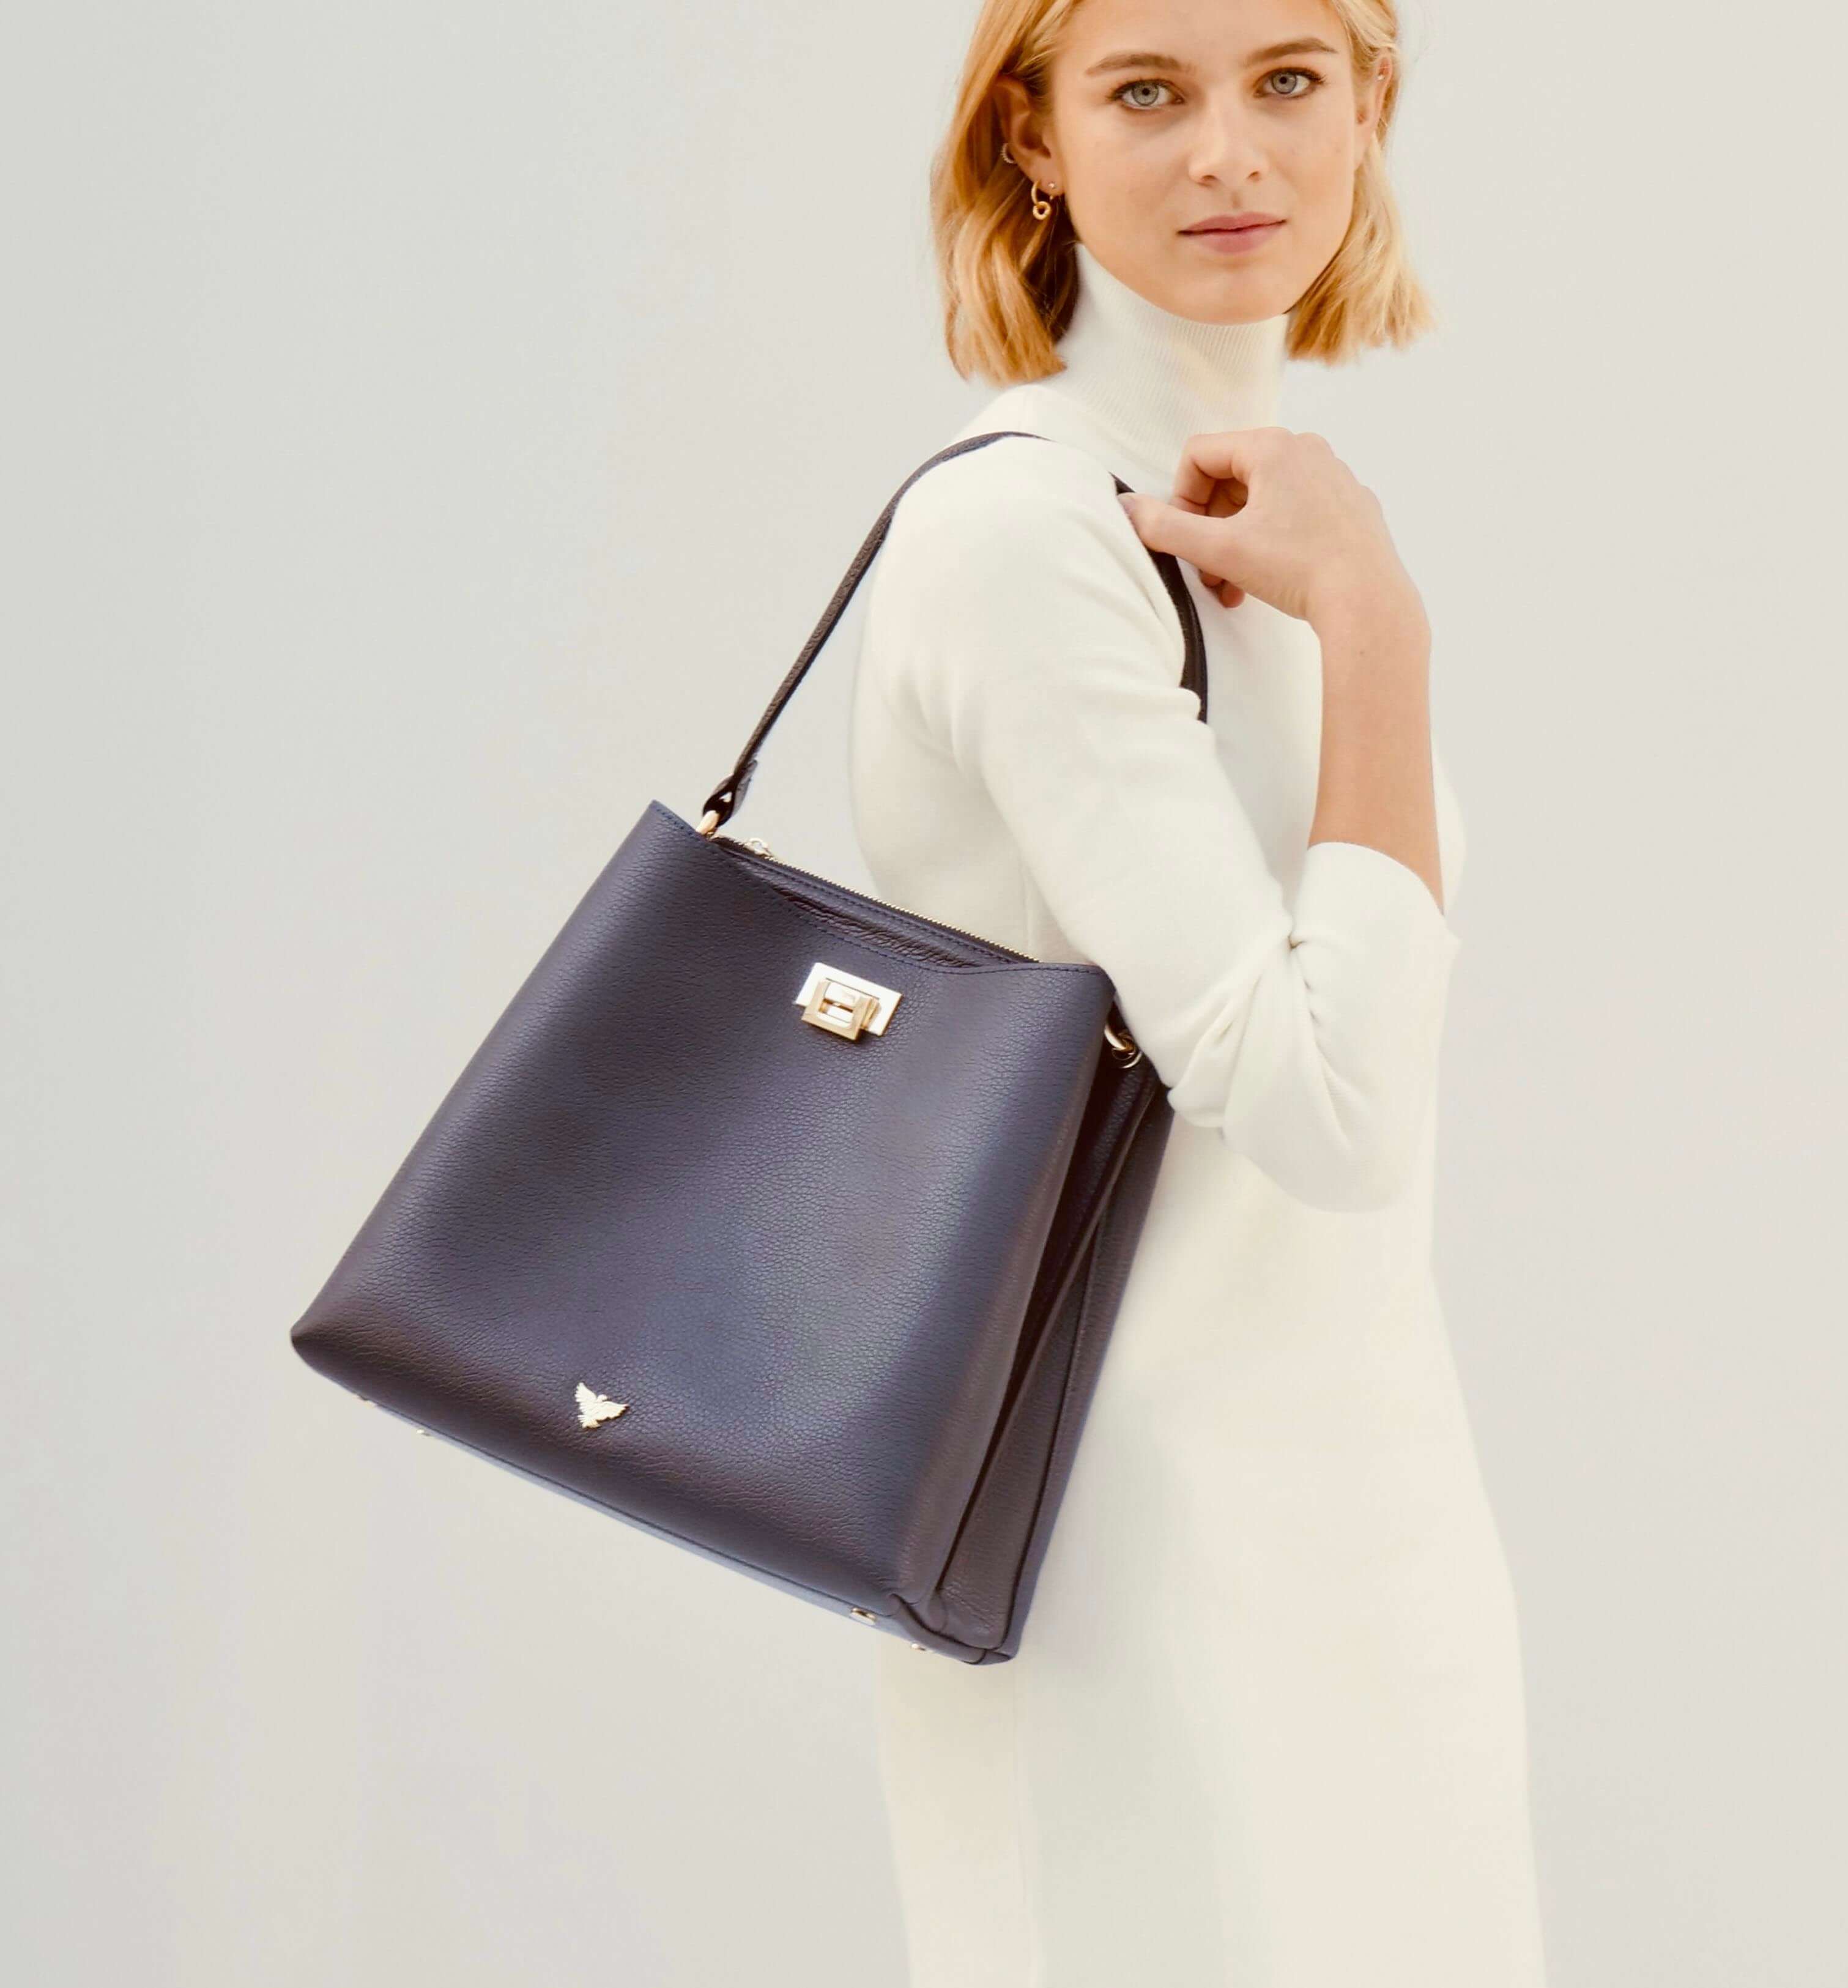 Navy Leather Tote Bag